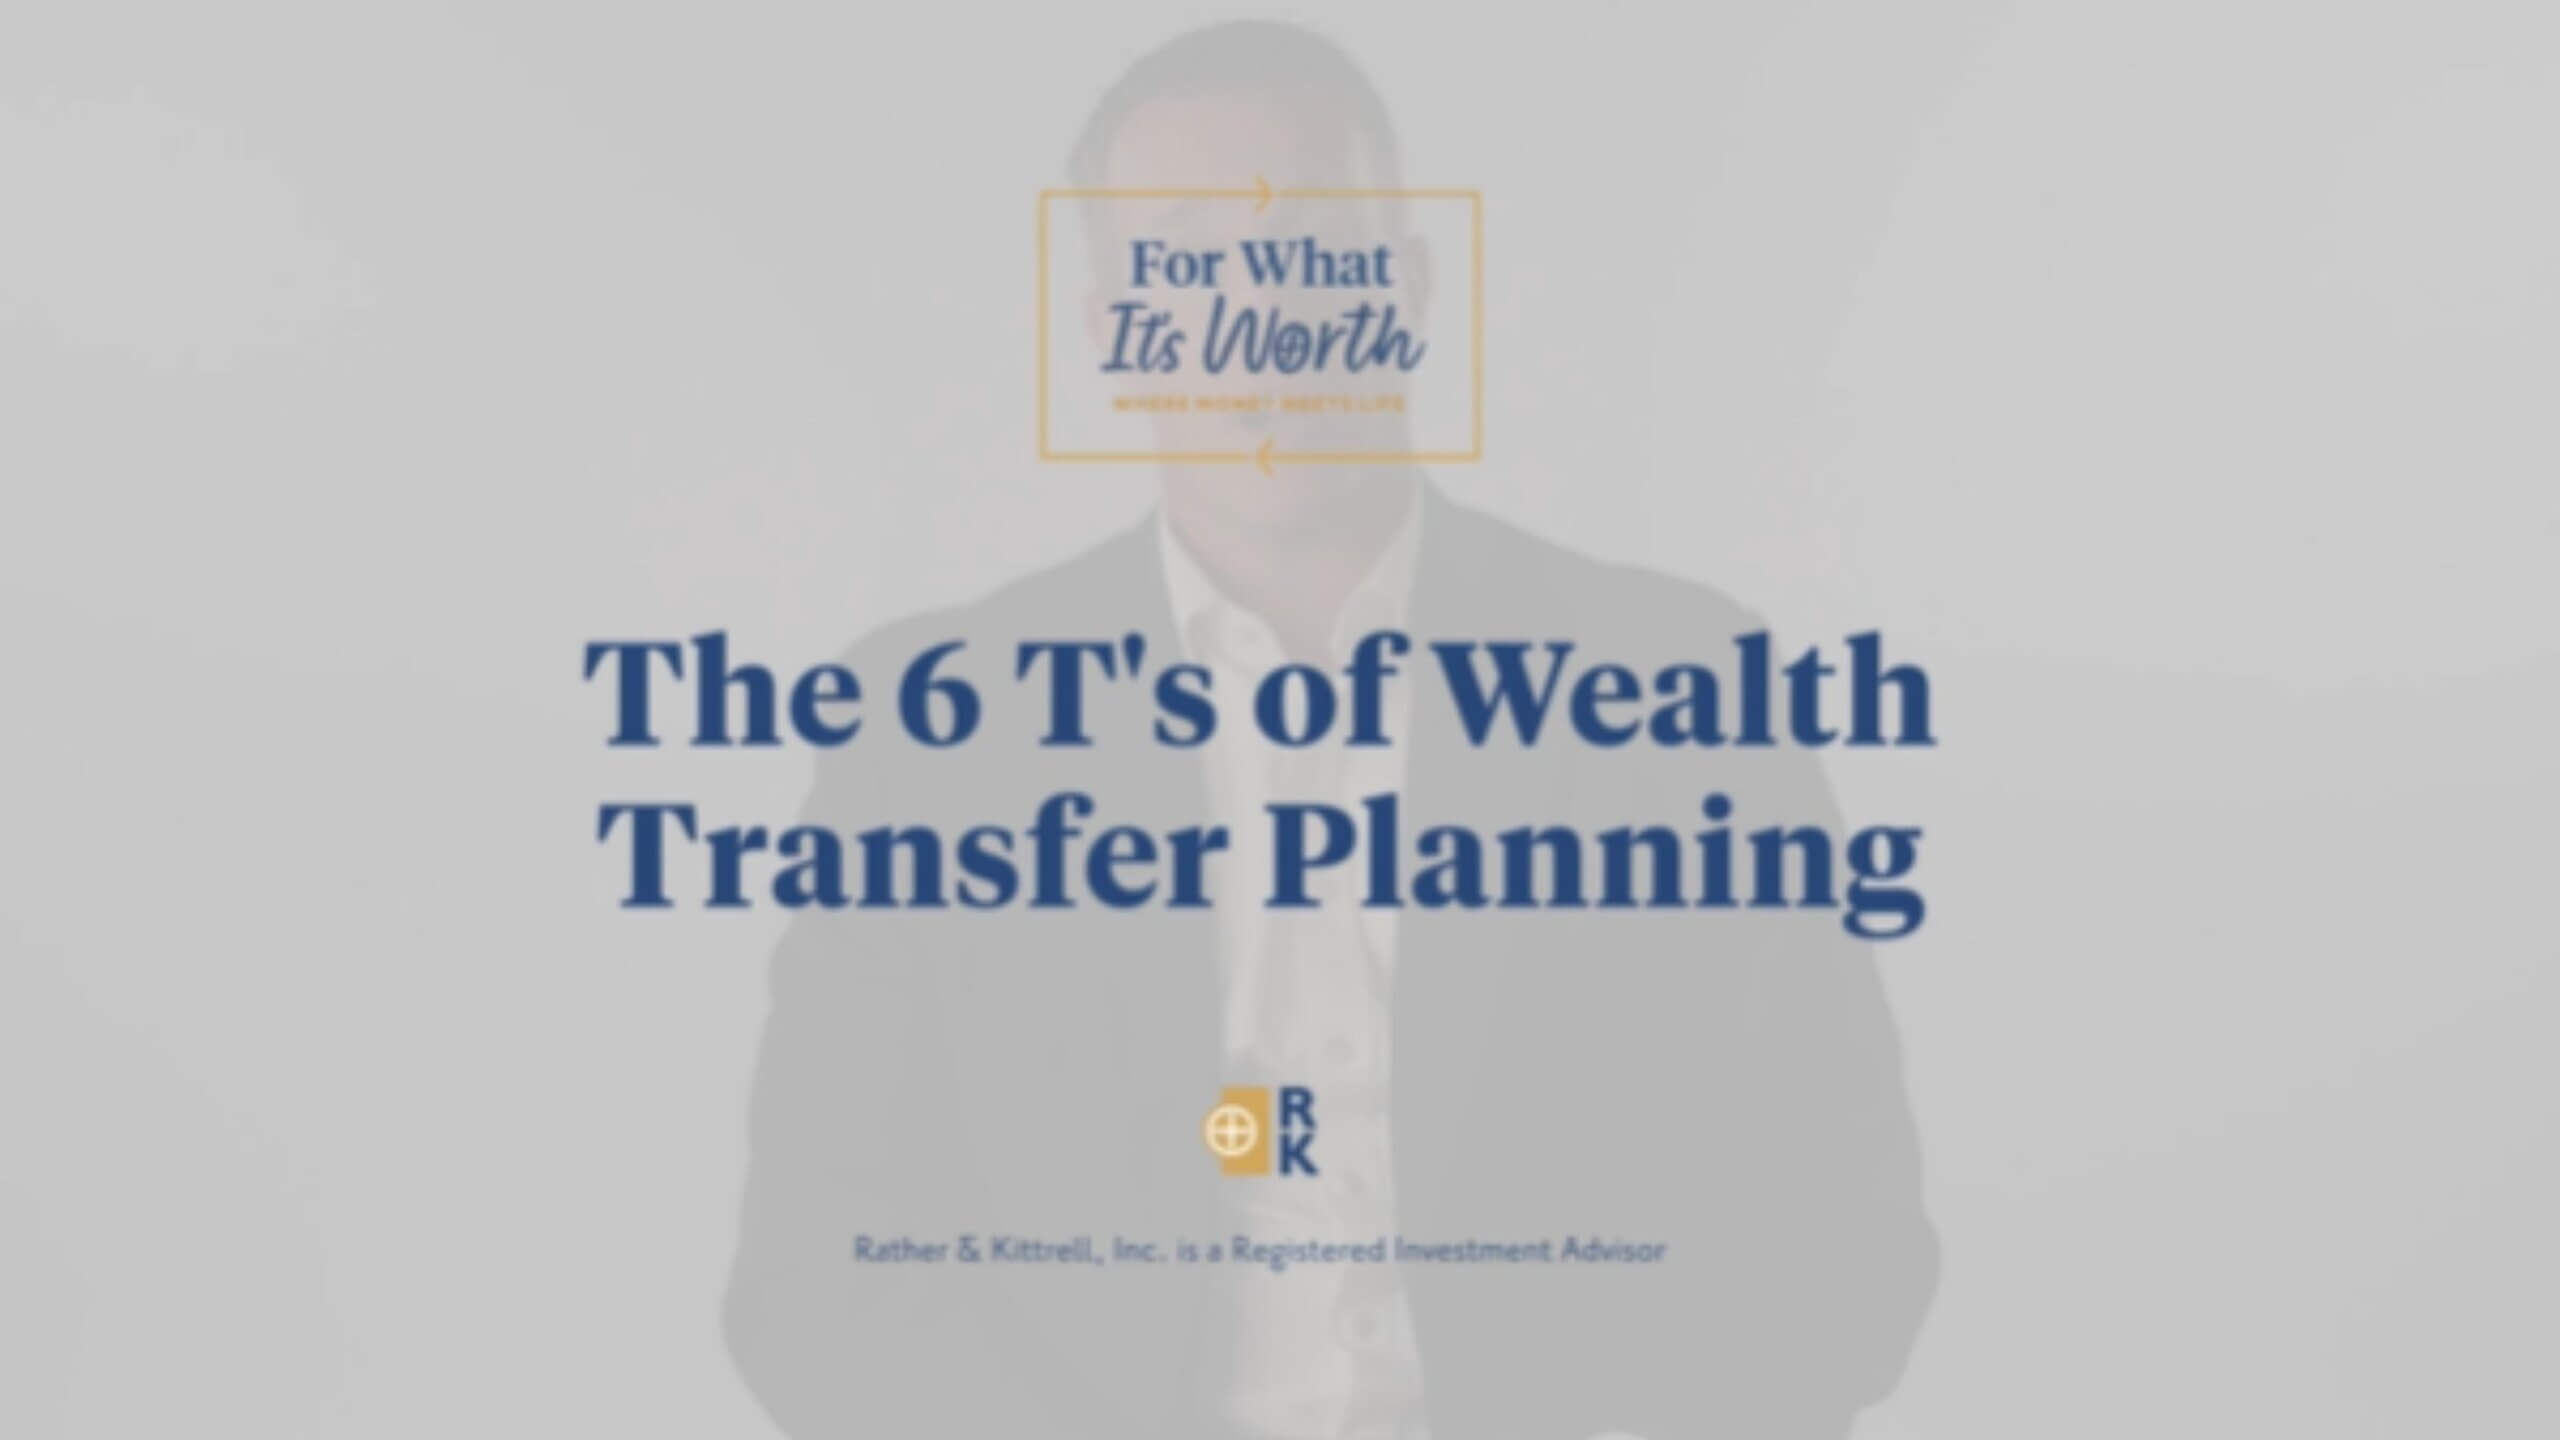 The 6 T's of wealth transfer planning